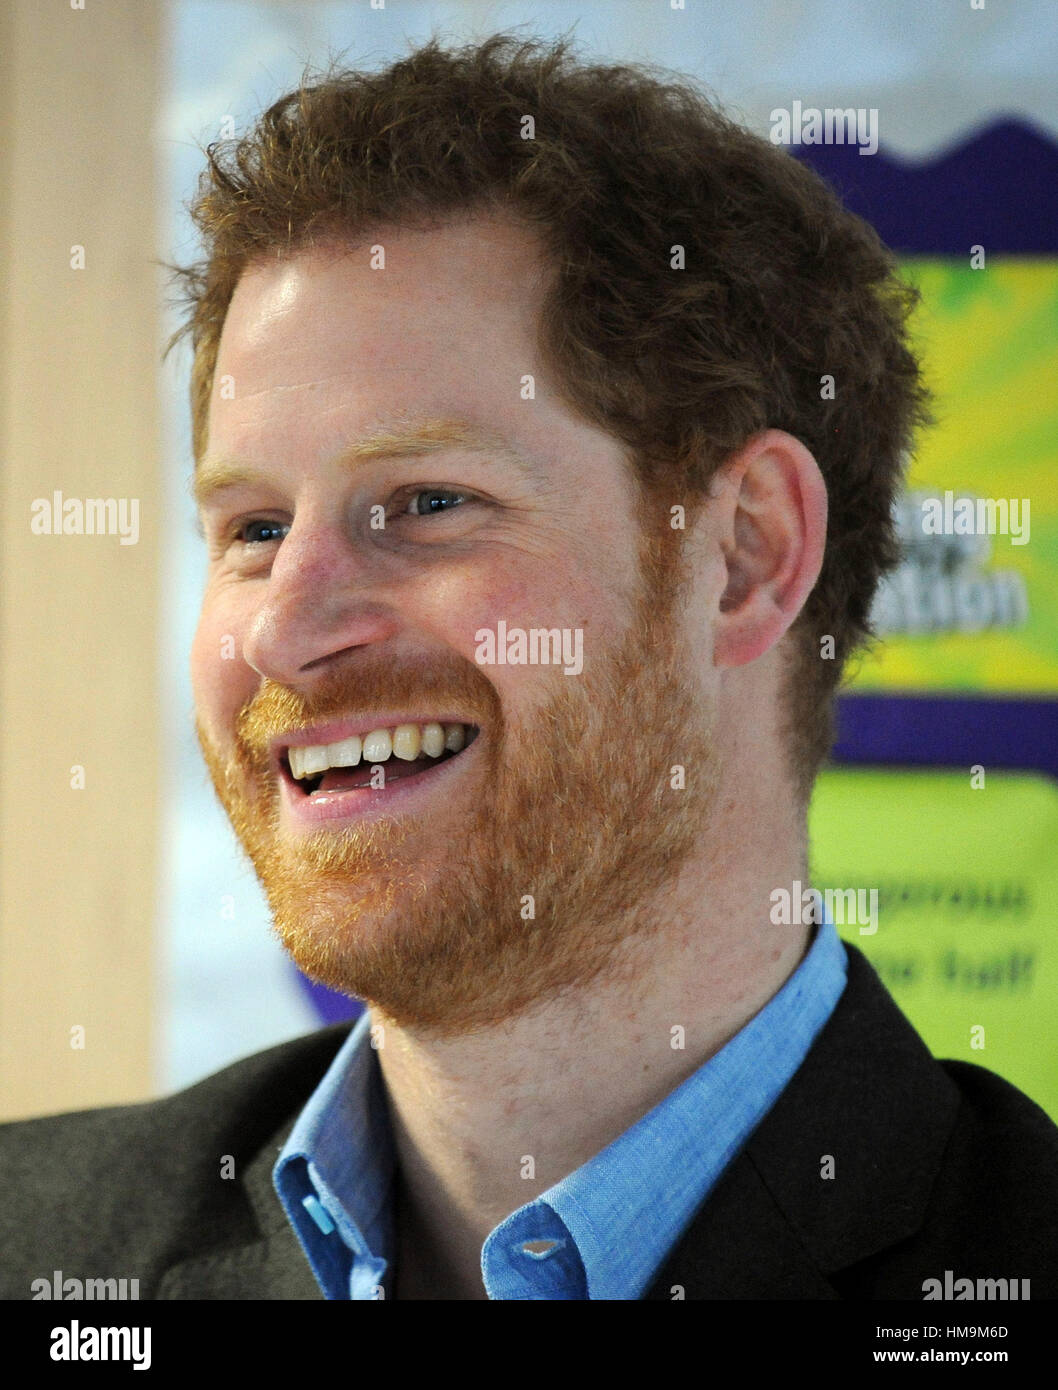 RETRANSMITTED CORRECTING BYLINE Prince Harry attends a lyrical writing class during a visit to the Full Effect and Coach Core programmes, two projects supported by The Royal Foundation that work to improve opportunities for young people, at Nottingham Academy. Stock Photo